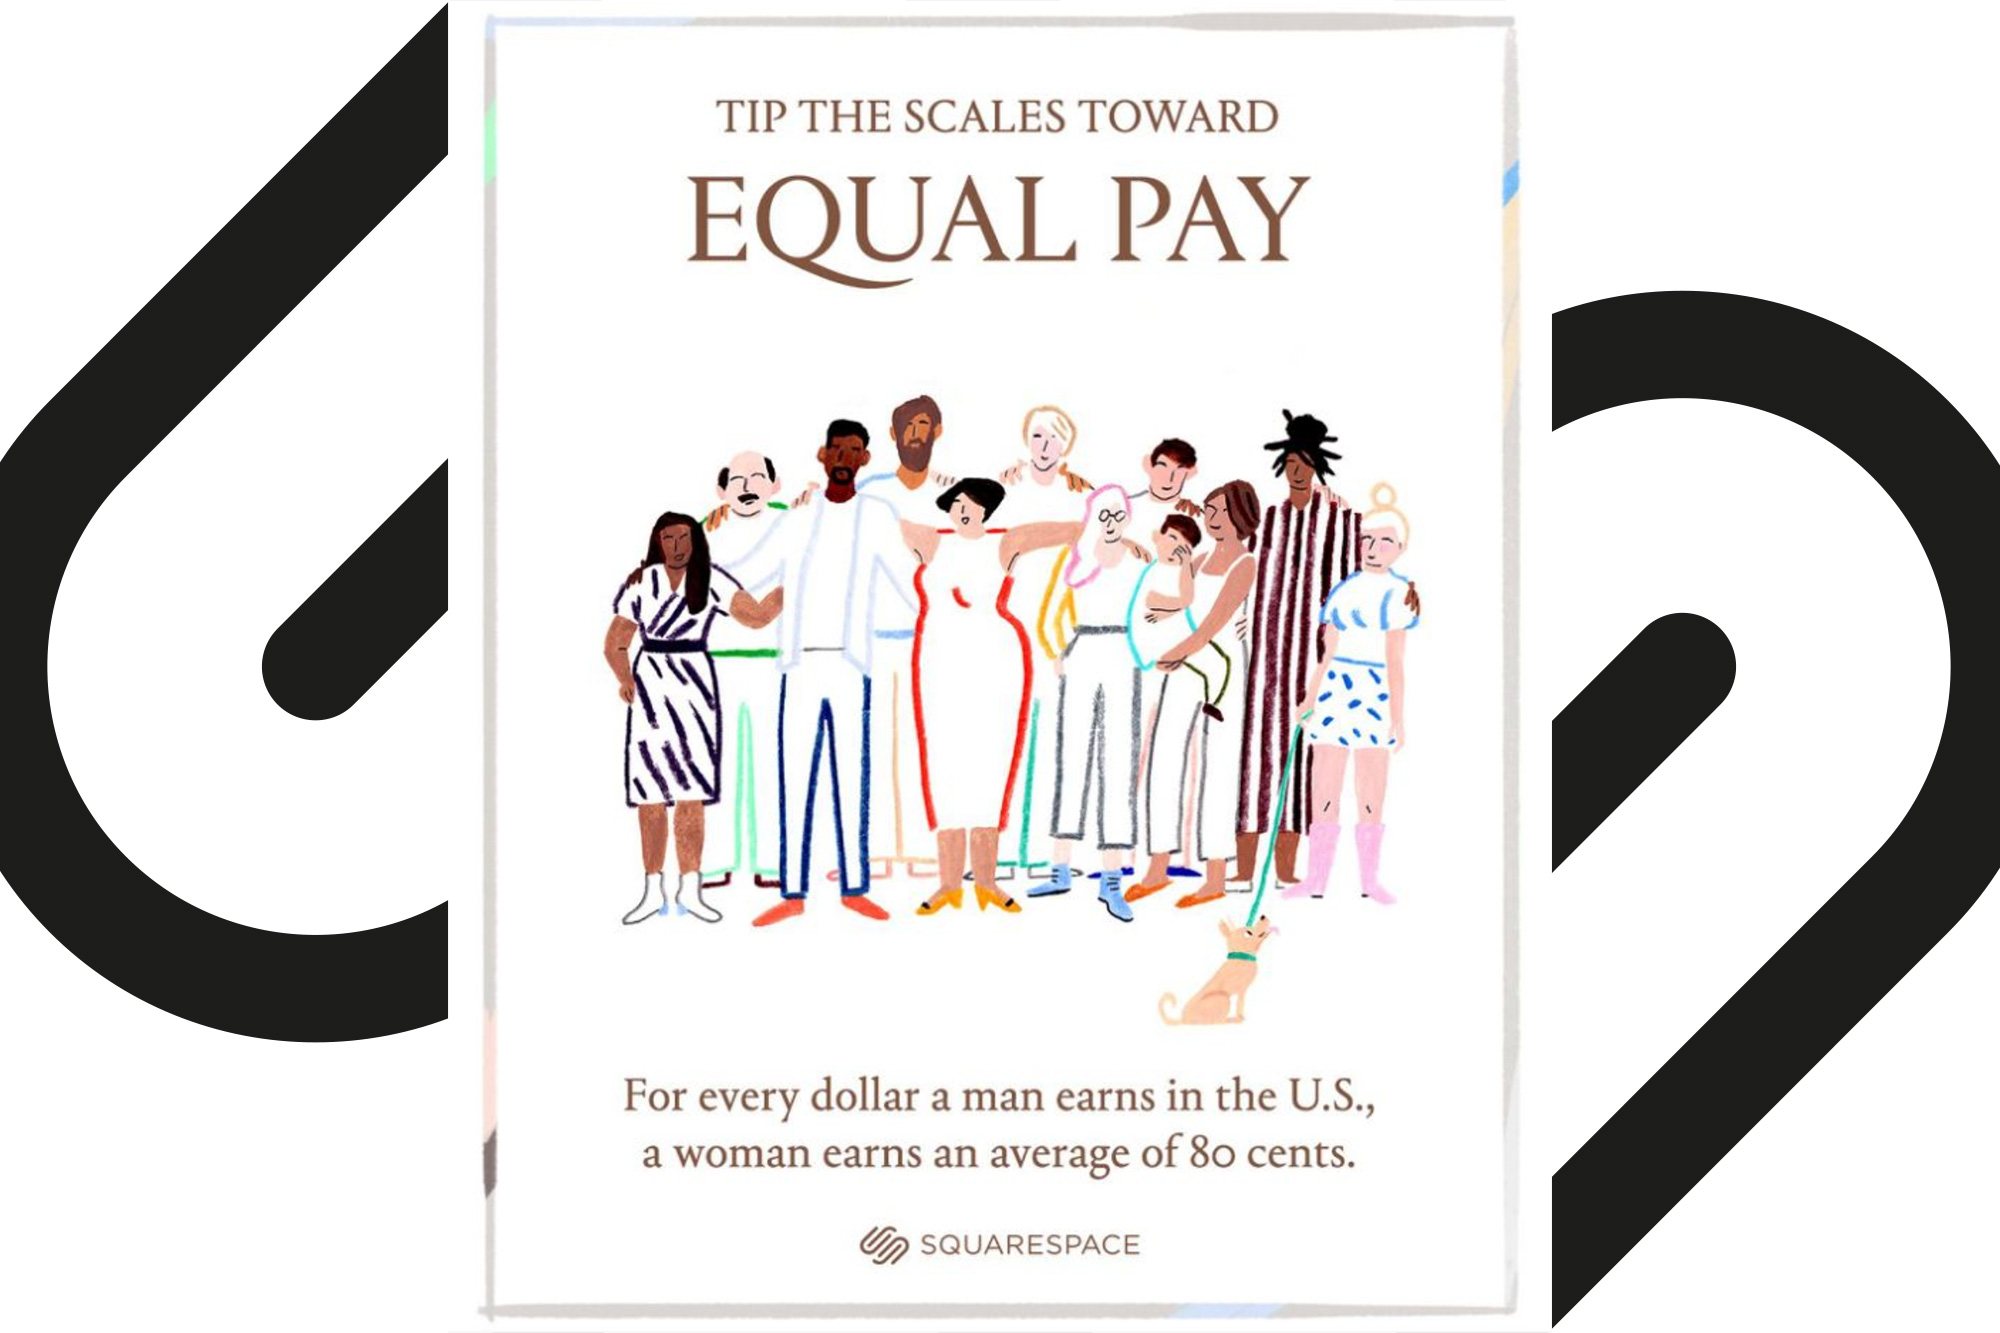 20% Off Squarespace Today Only For Equal Pay Day (With Code)